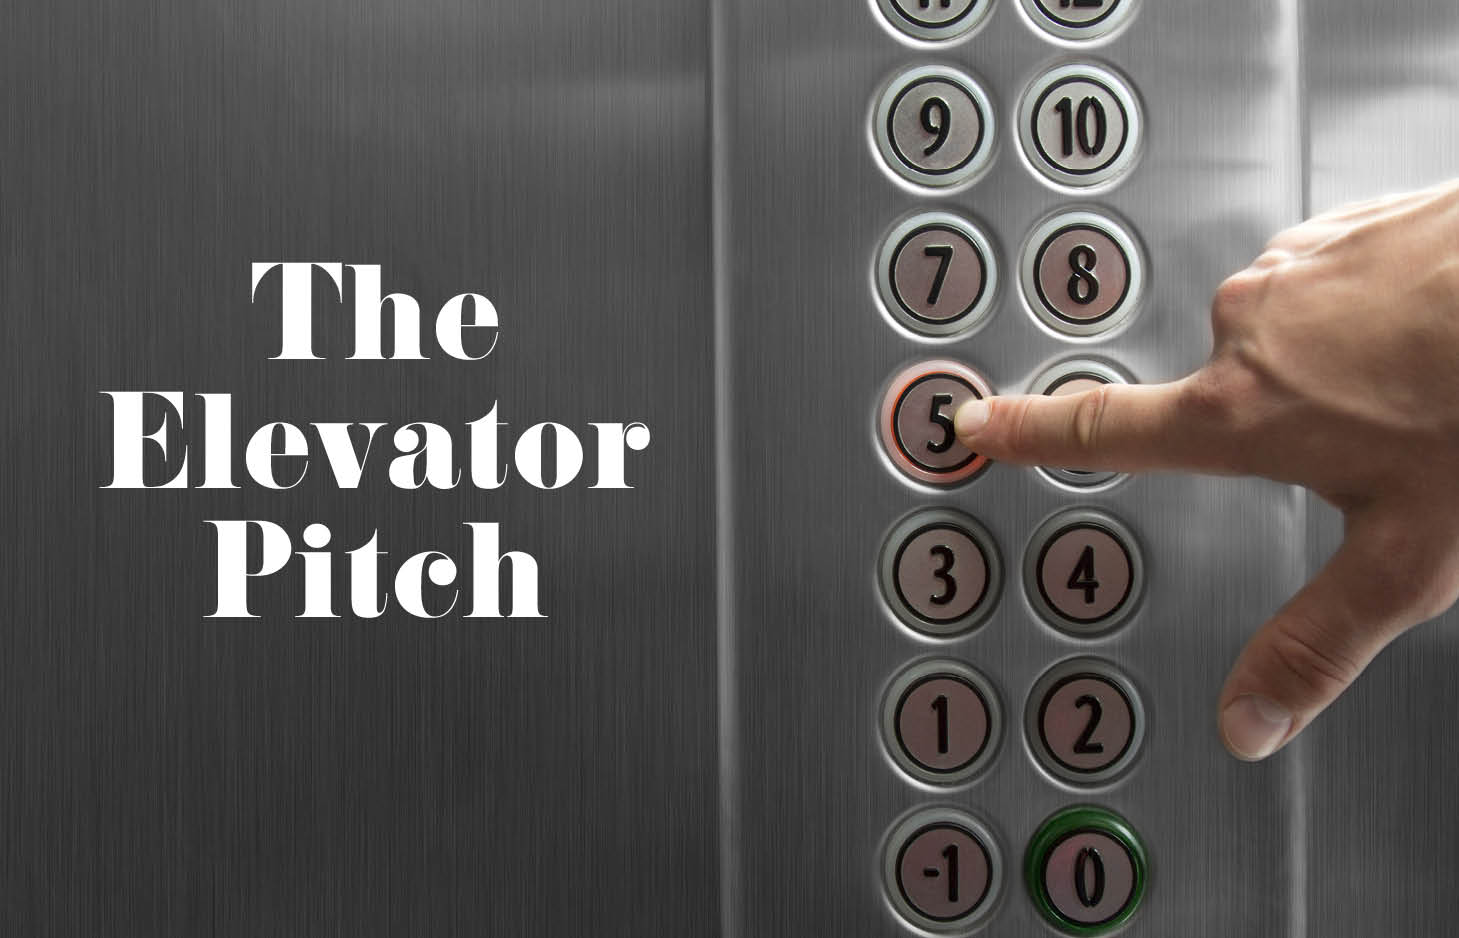 APRIL 2018 - THE ELEVATOR PITCH